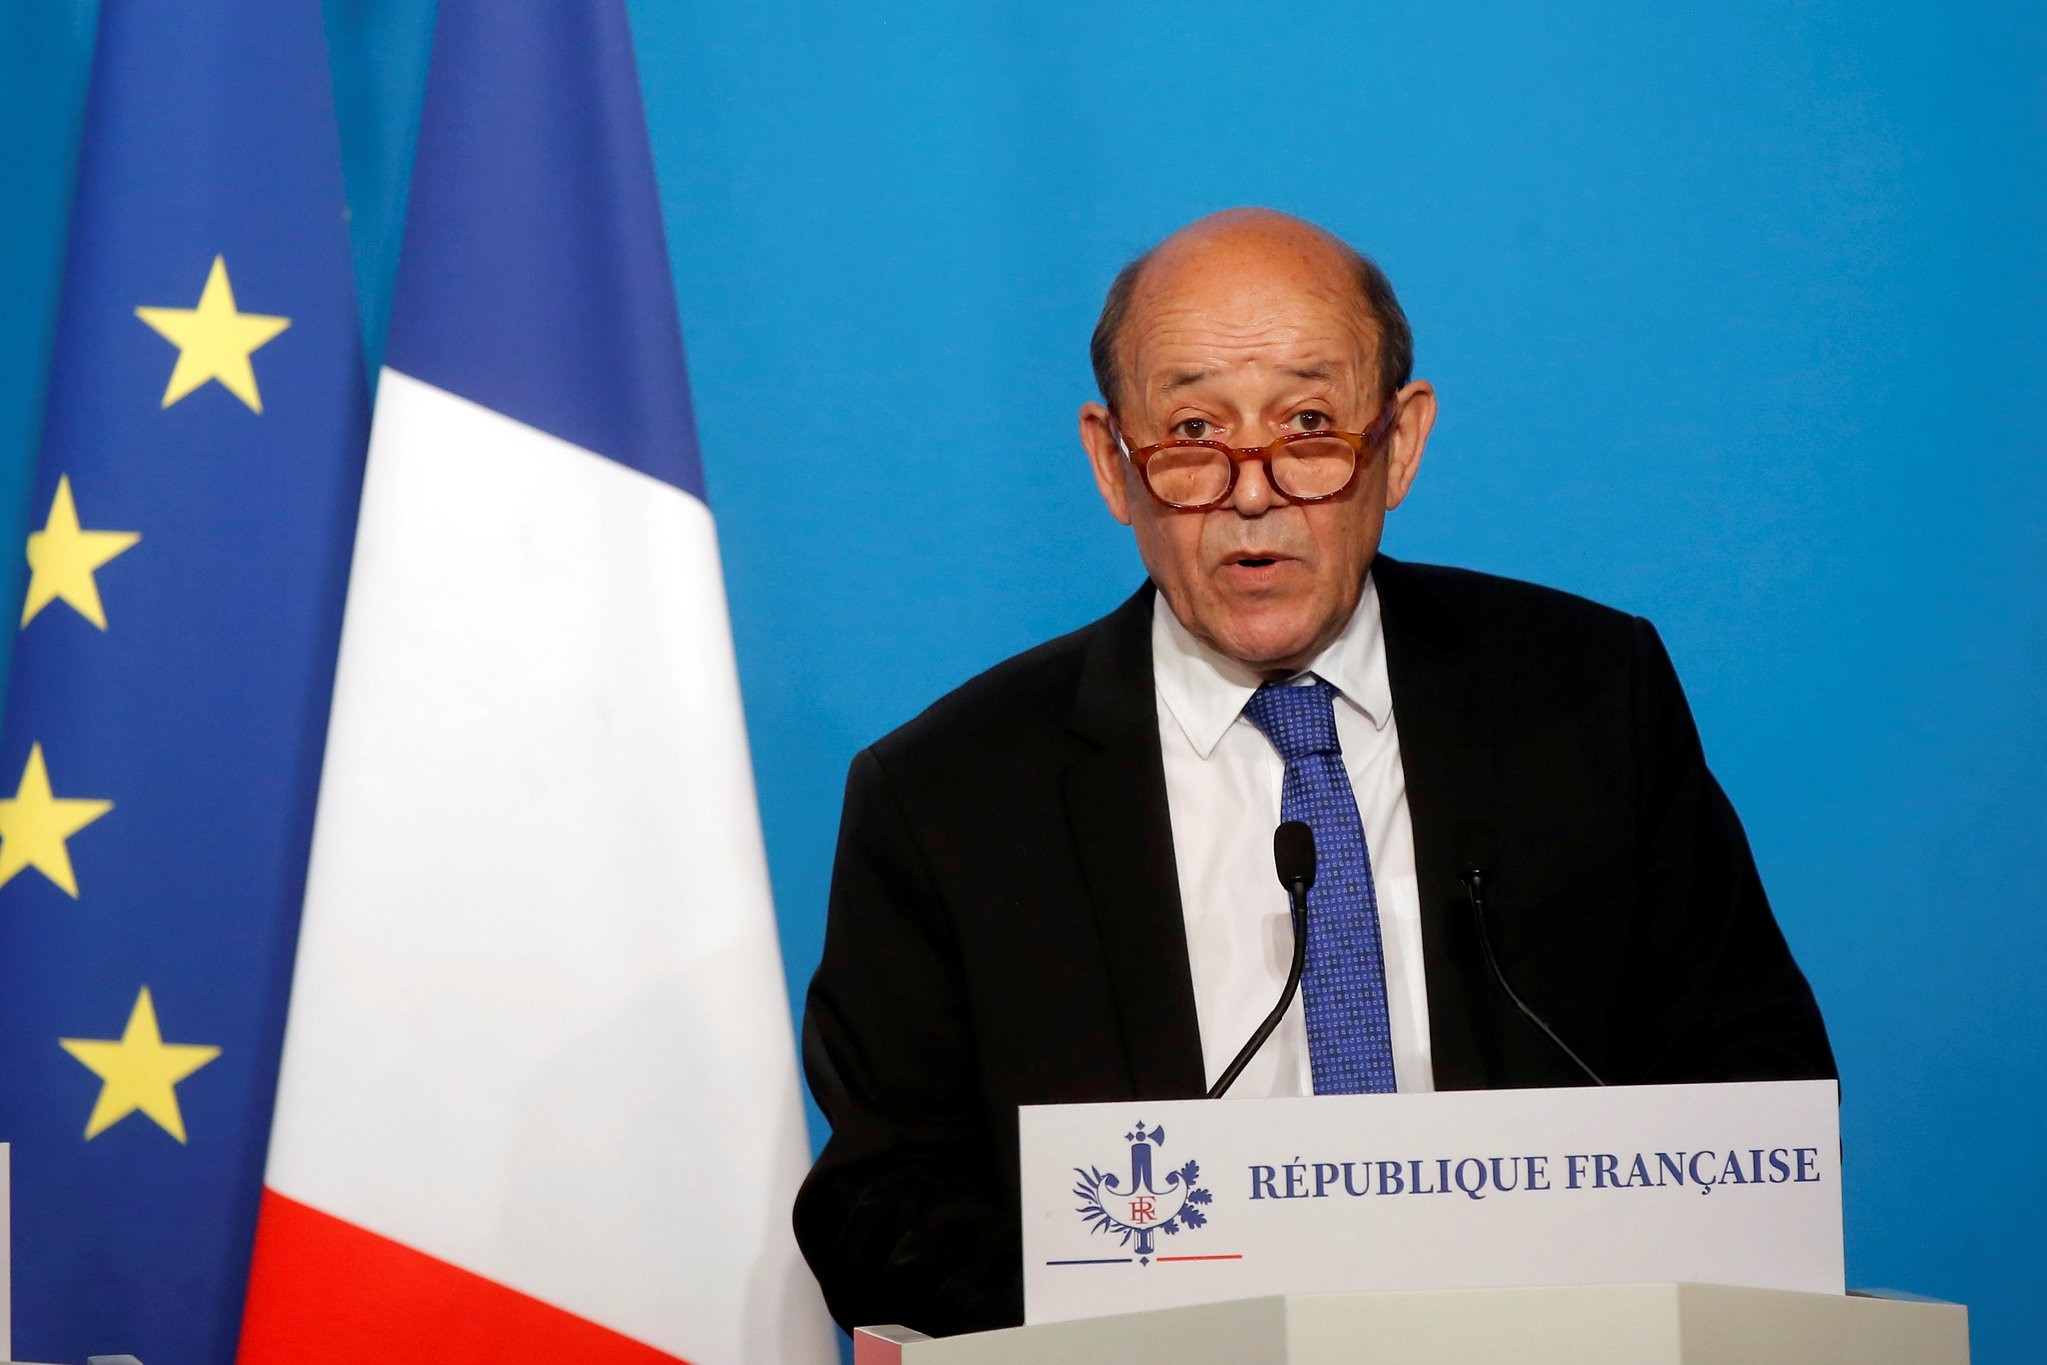 French Minister for Foreign Affairs Jean-Yves Le Drian makes an official statement in the press room at the Elysee Palace, in Paris, France, April 14, 2018. (Pool via Reuters)